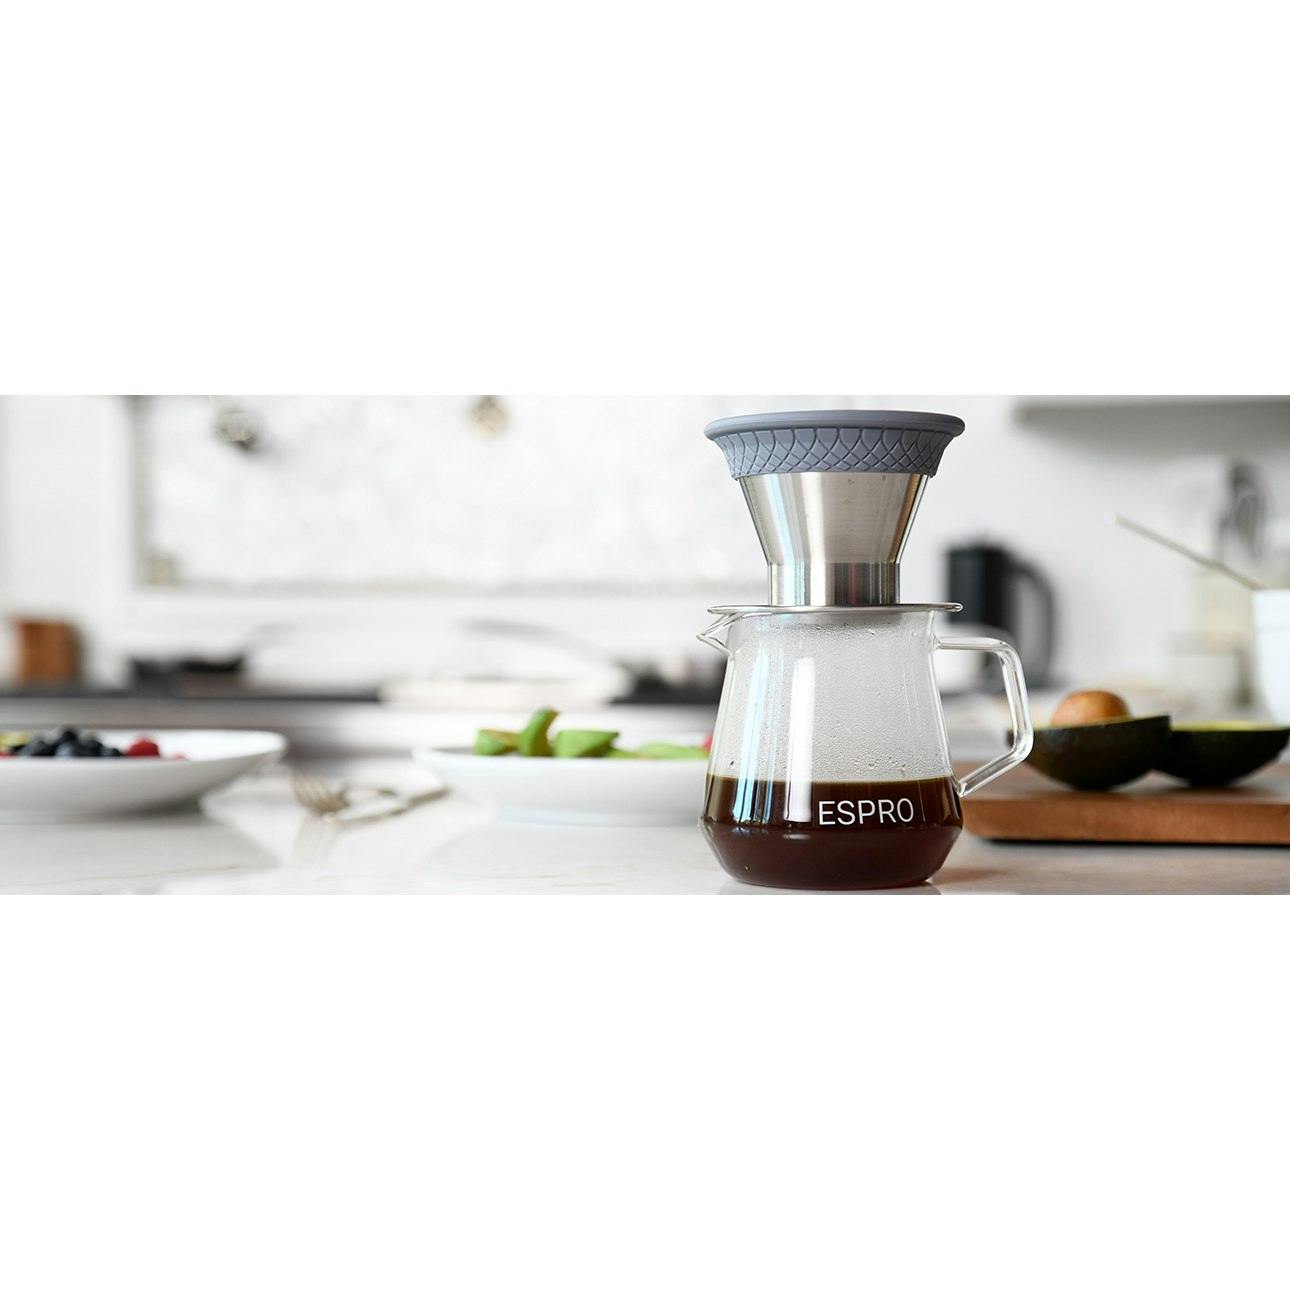 https://huckberry.imgix.net/spree/products/681974/original/77763_Espro_Bloom_Pour_Over_Coffee_Brewer_Kit_Clear_04_WEB.jpg?auto=format%2C%20compress&crop=top&fit=clip&cs=tinysrgb&ixlib=react-9.5.2